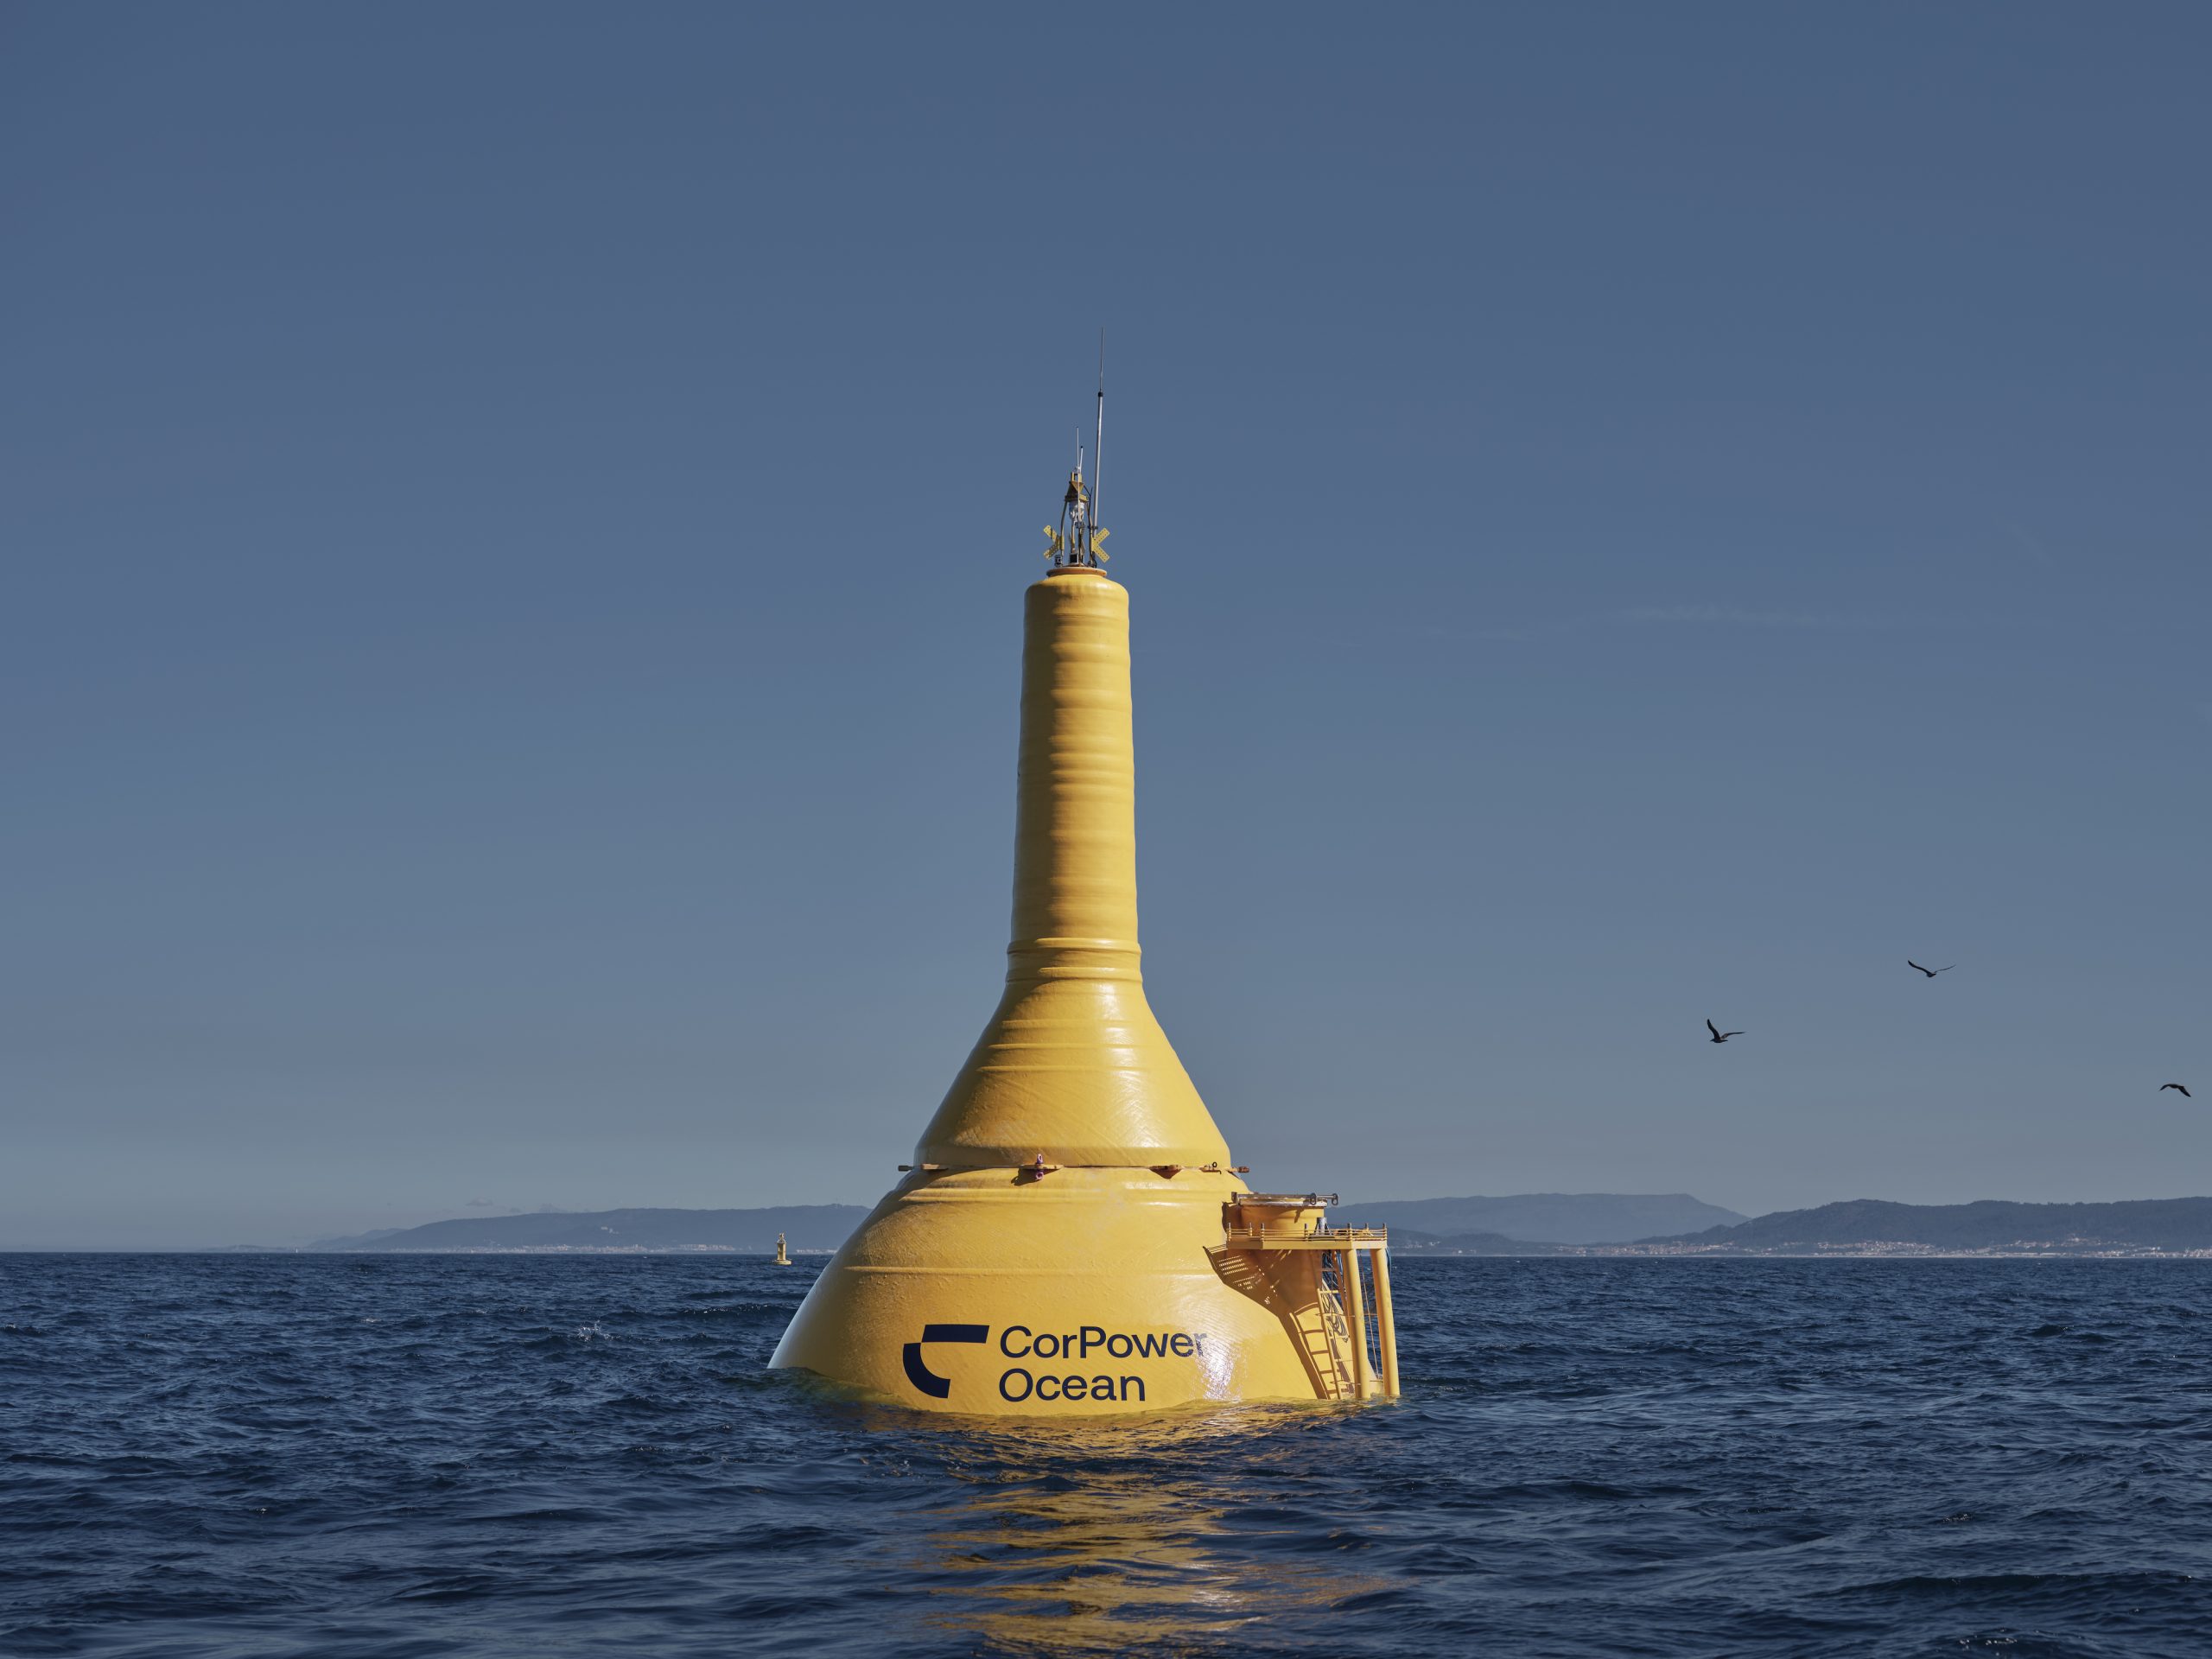 Corpower Ocean Achieves Milestone With Commercial Wave Energy Converter Deployment 3163